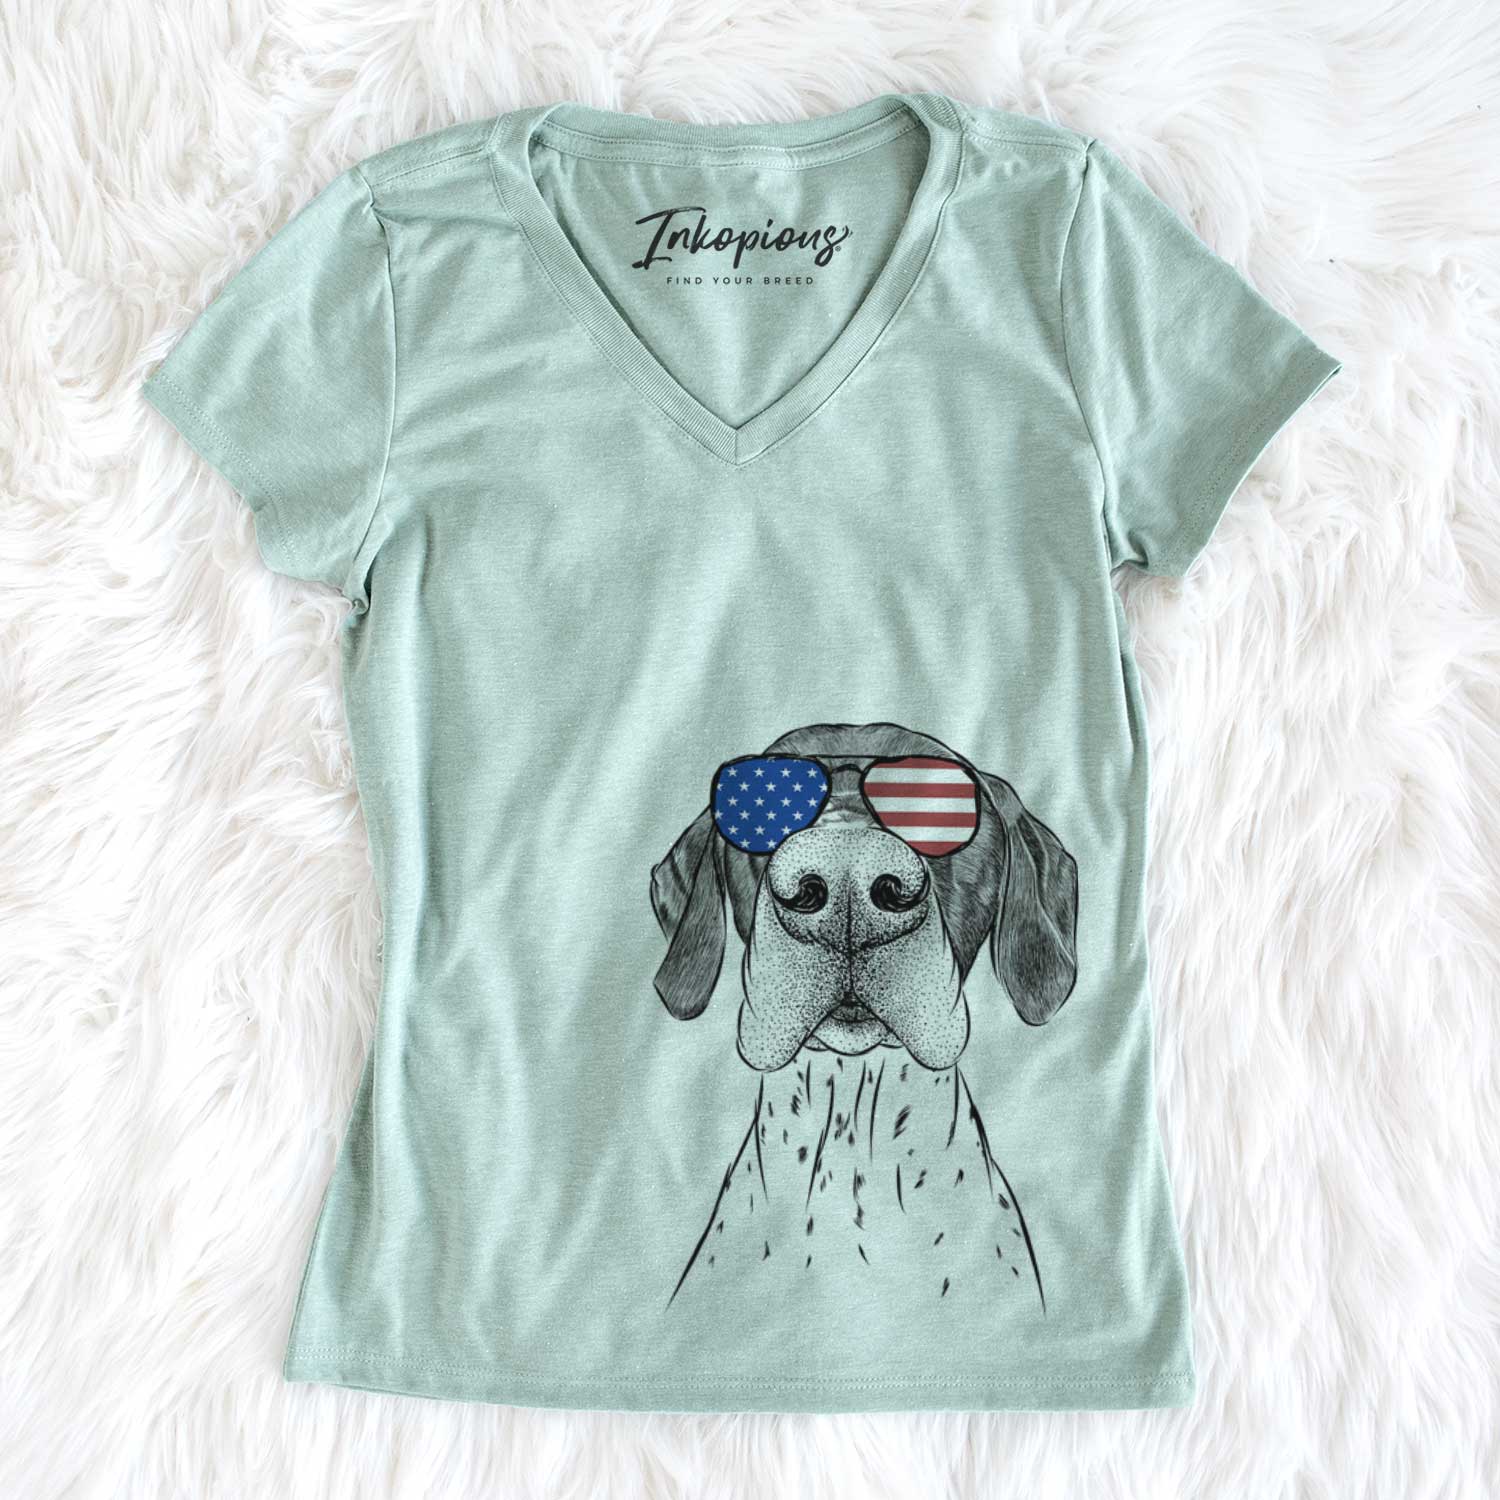 USA Booze the German Shorthaired Pointer - Women's Perfect V-neck Shirt